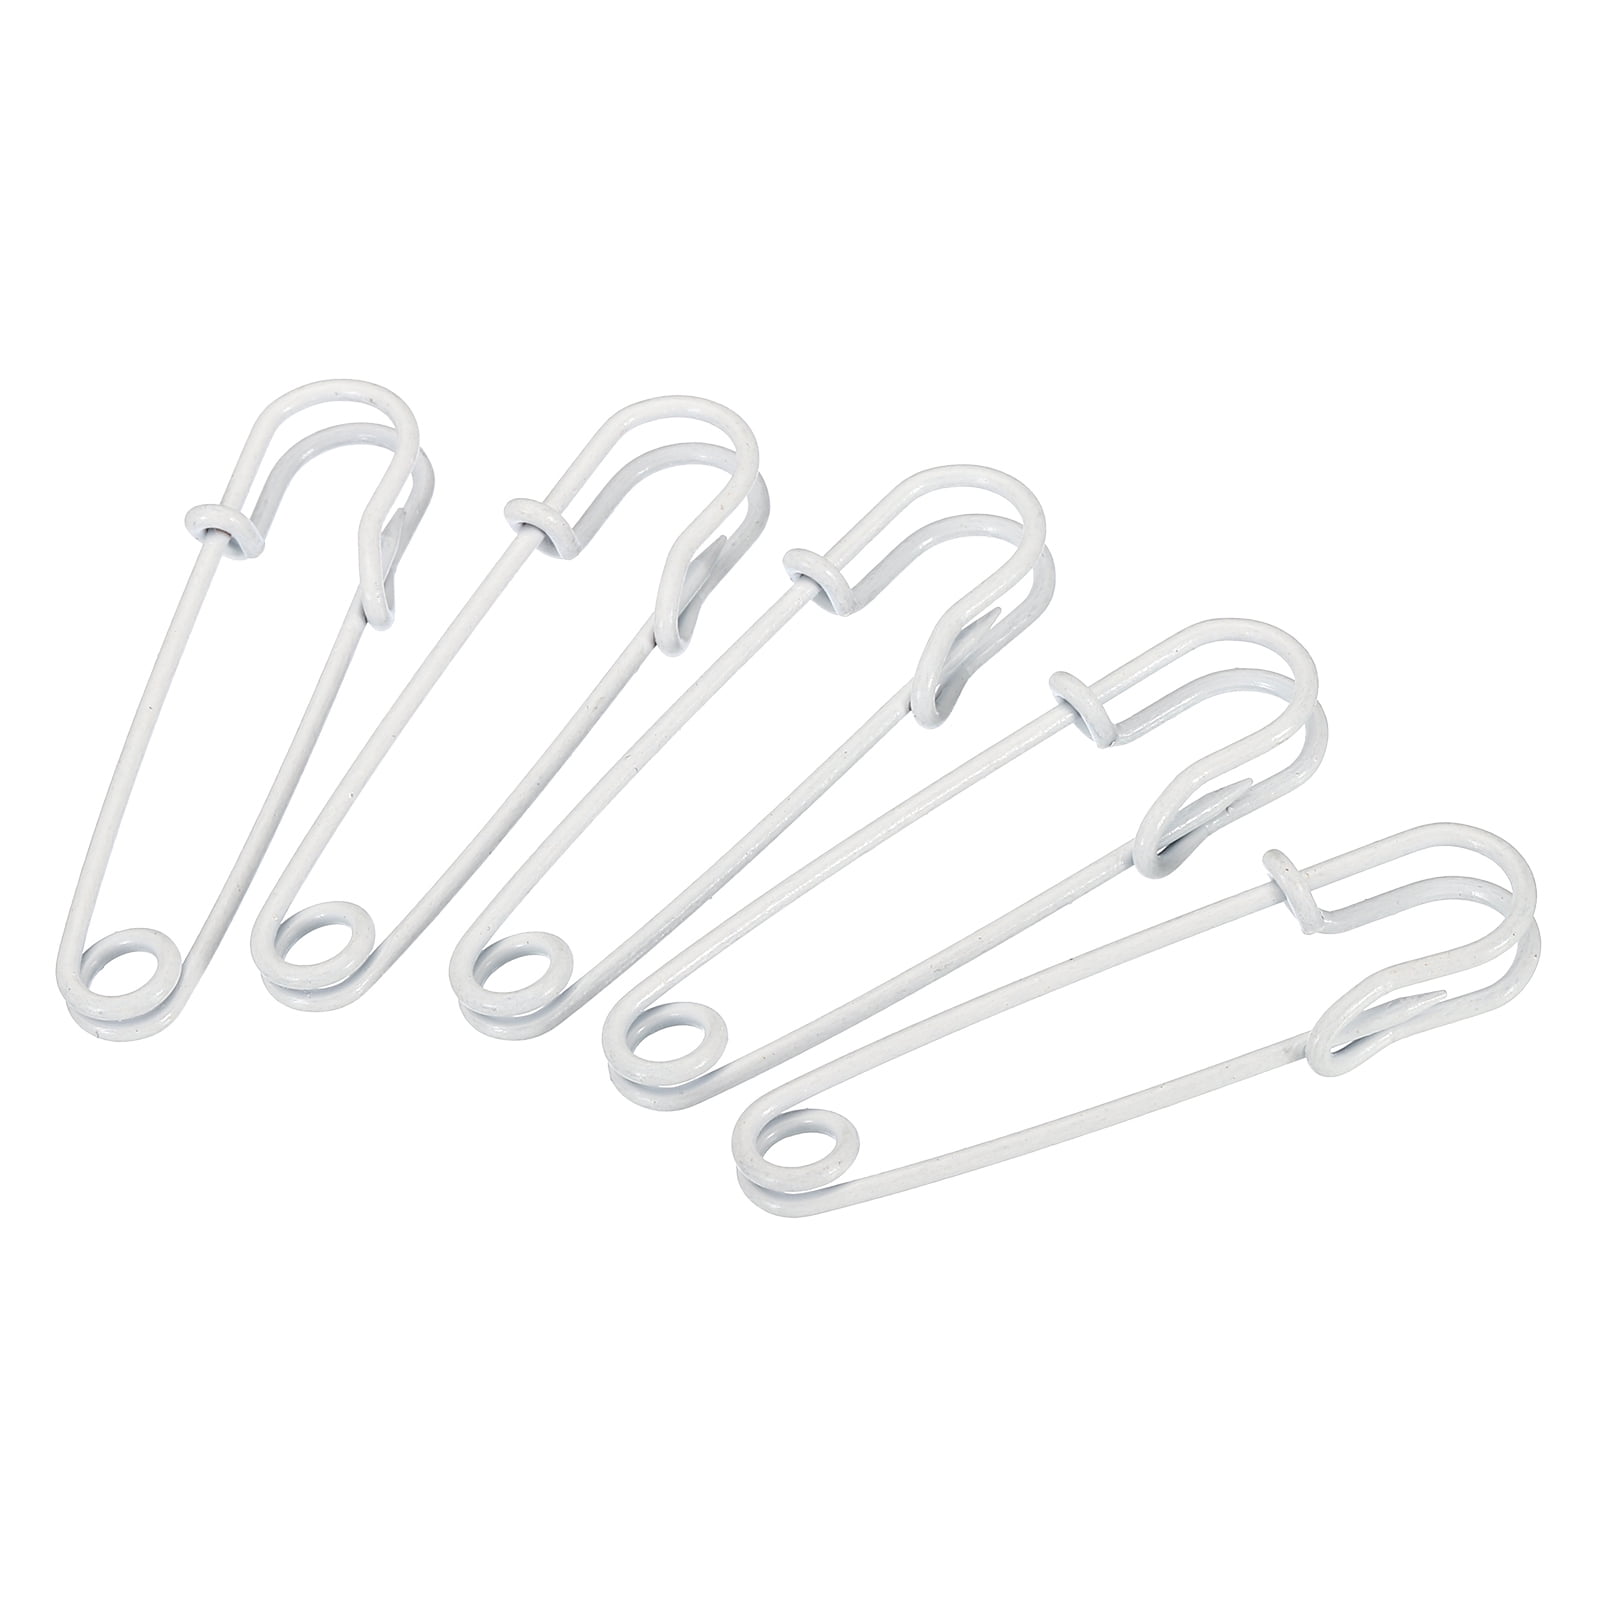 Uxcell Safety Pins 248 Inch Large Metal Sewing Pins White 20pcs